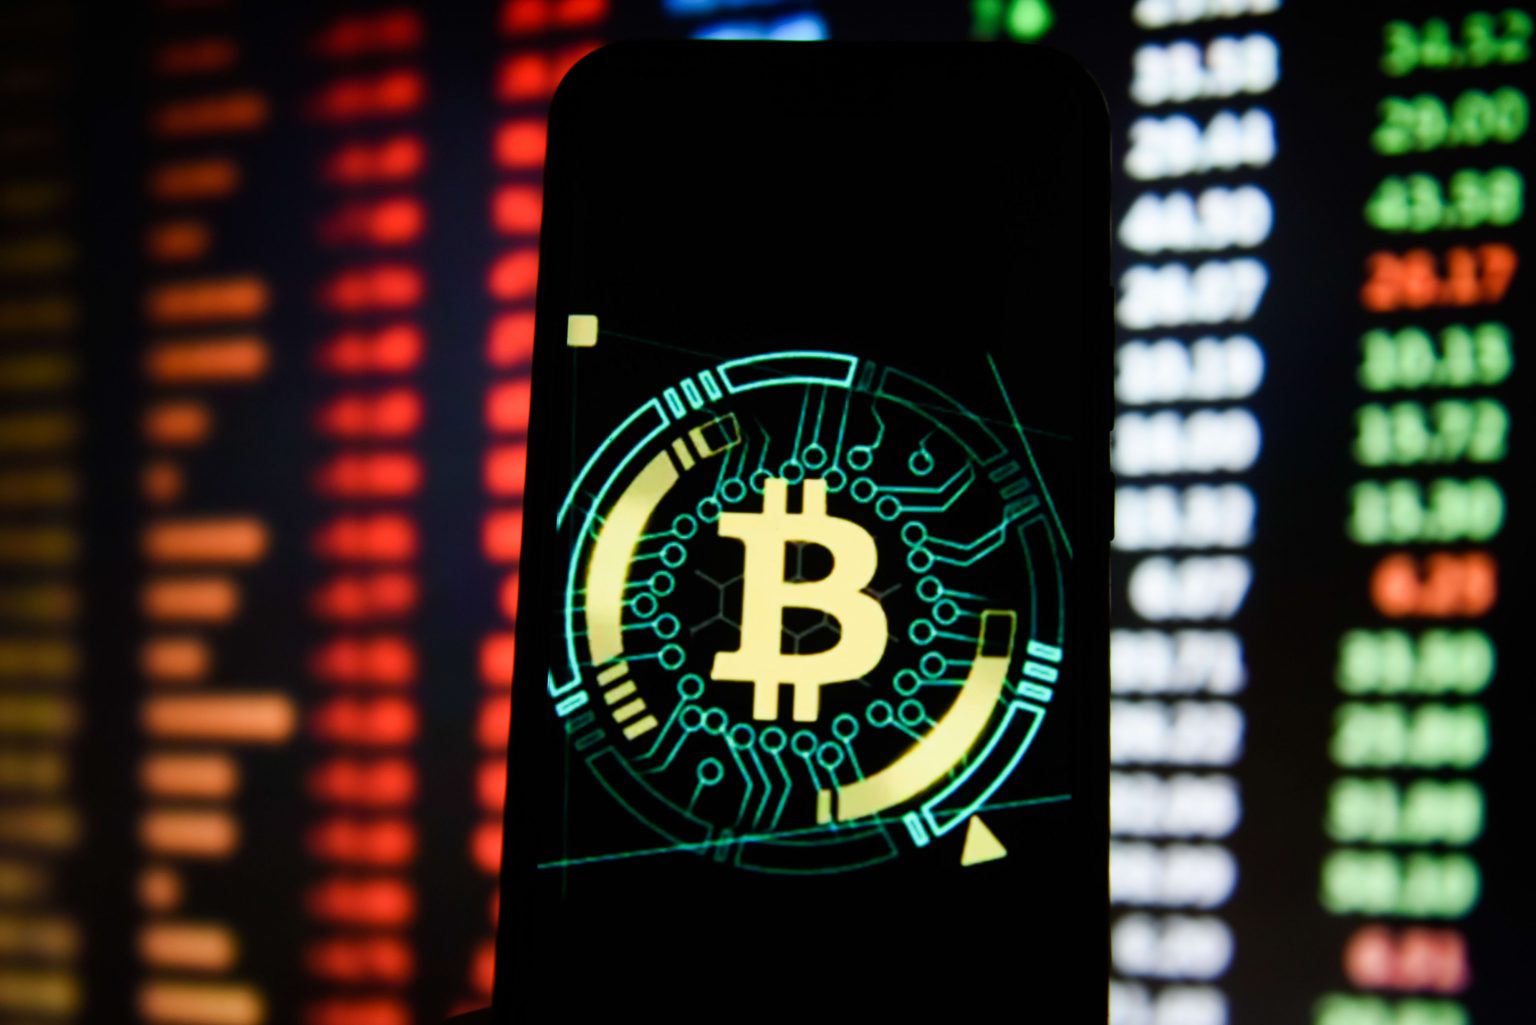 Square buys $50 million in bitcoin, says cryptocurrency ...